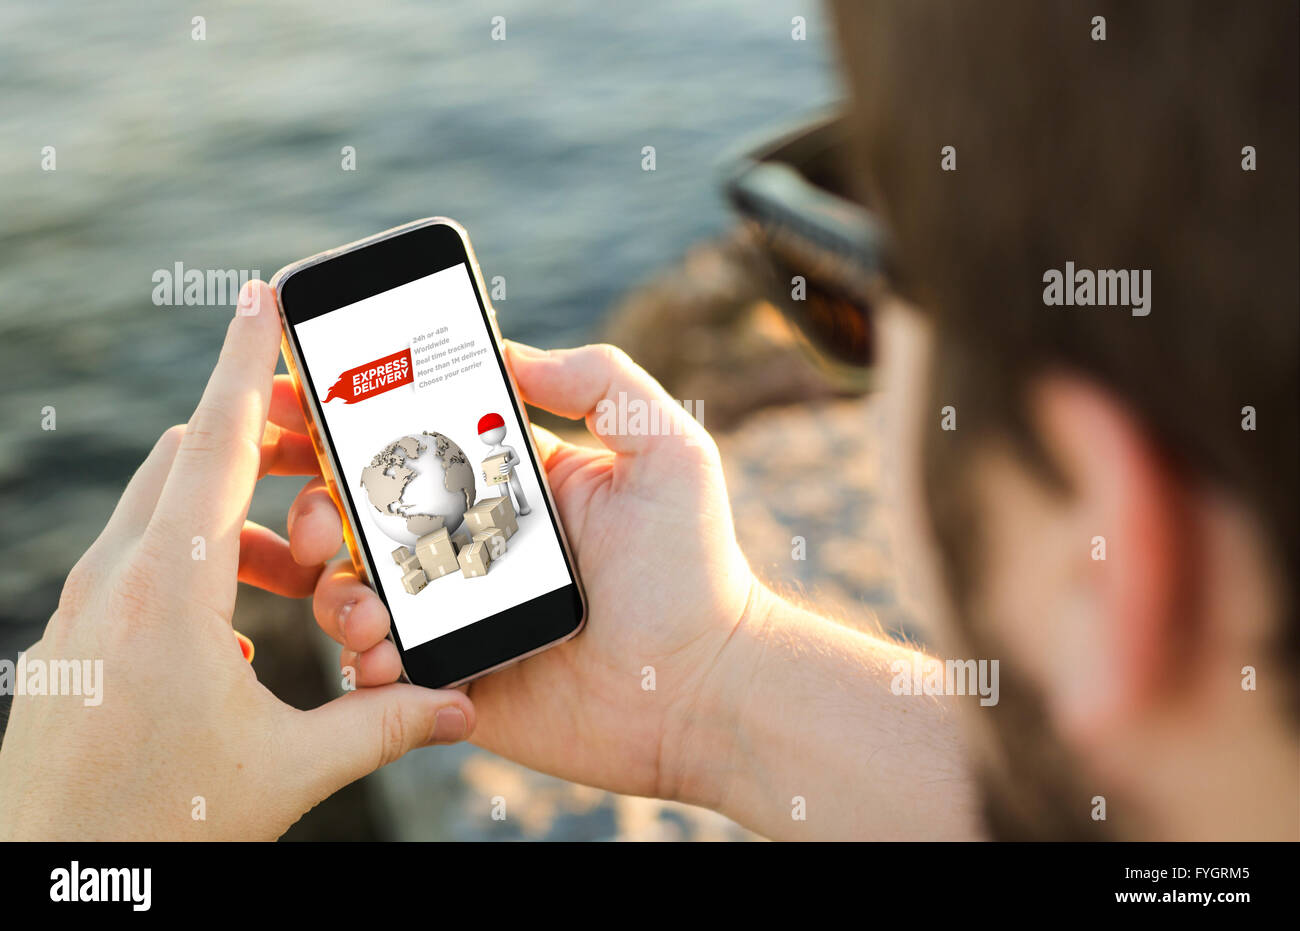 man on the coast using his smartphone showing express delivery website. All screen graphics are made up. Stock Photo